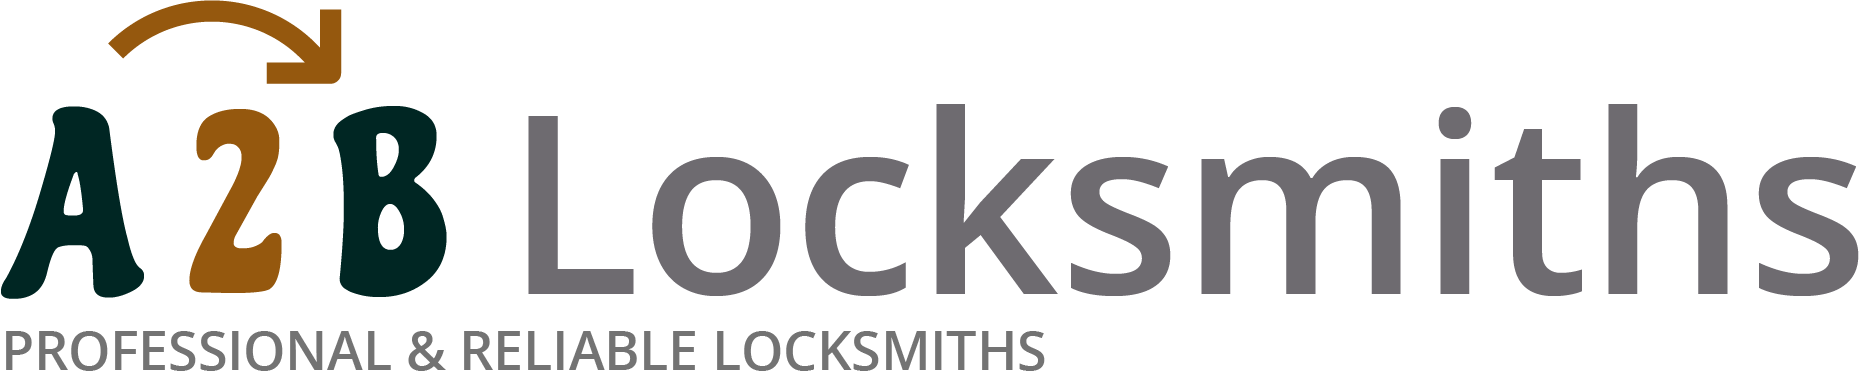 If you are locked out of house in Ashtead, our 24/7 local emergency locksmith services can help you.